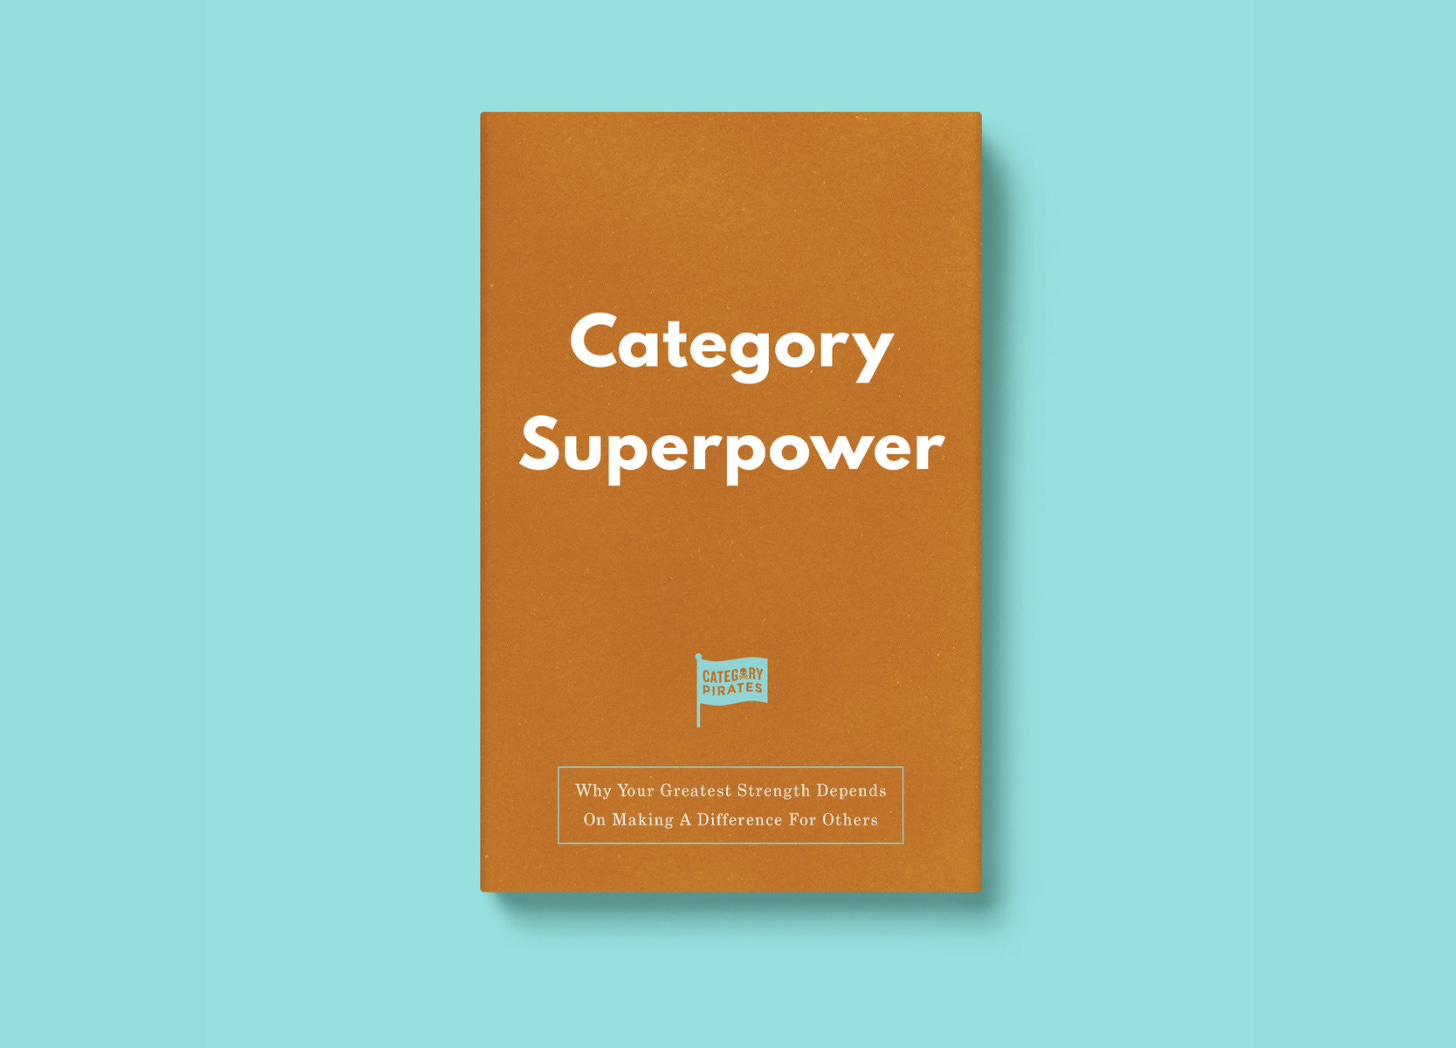 A brown book cover with the title Category Superpower, Why Your Greatest Strength Depends On Making A Difference For Others